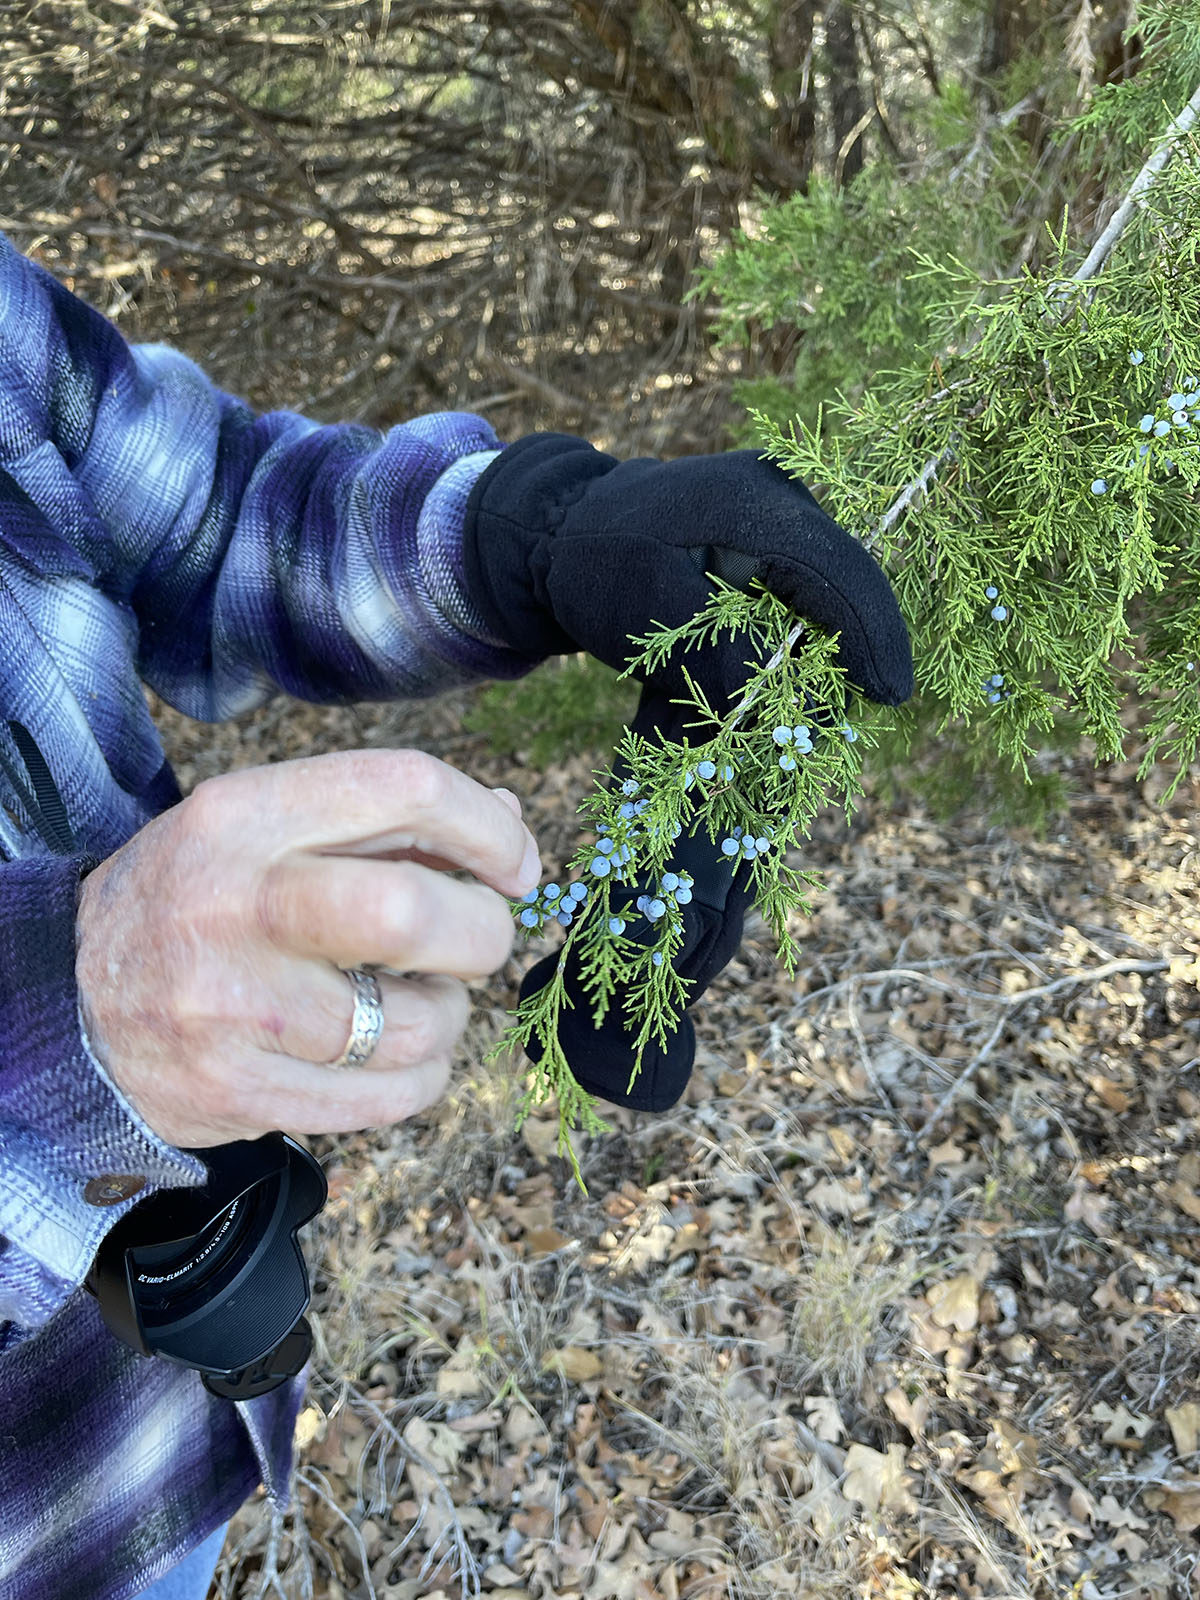 The hands of a tour guide shows her holding a small lens up to the small blue berries of a branch. 